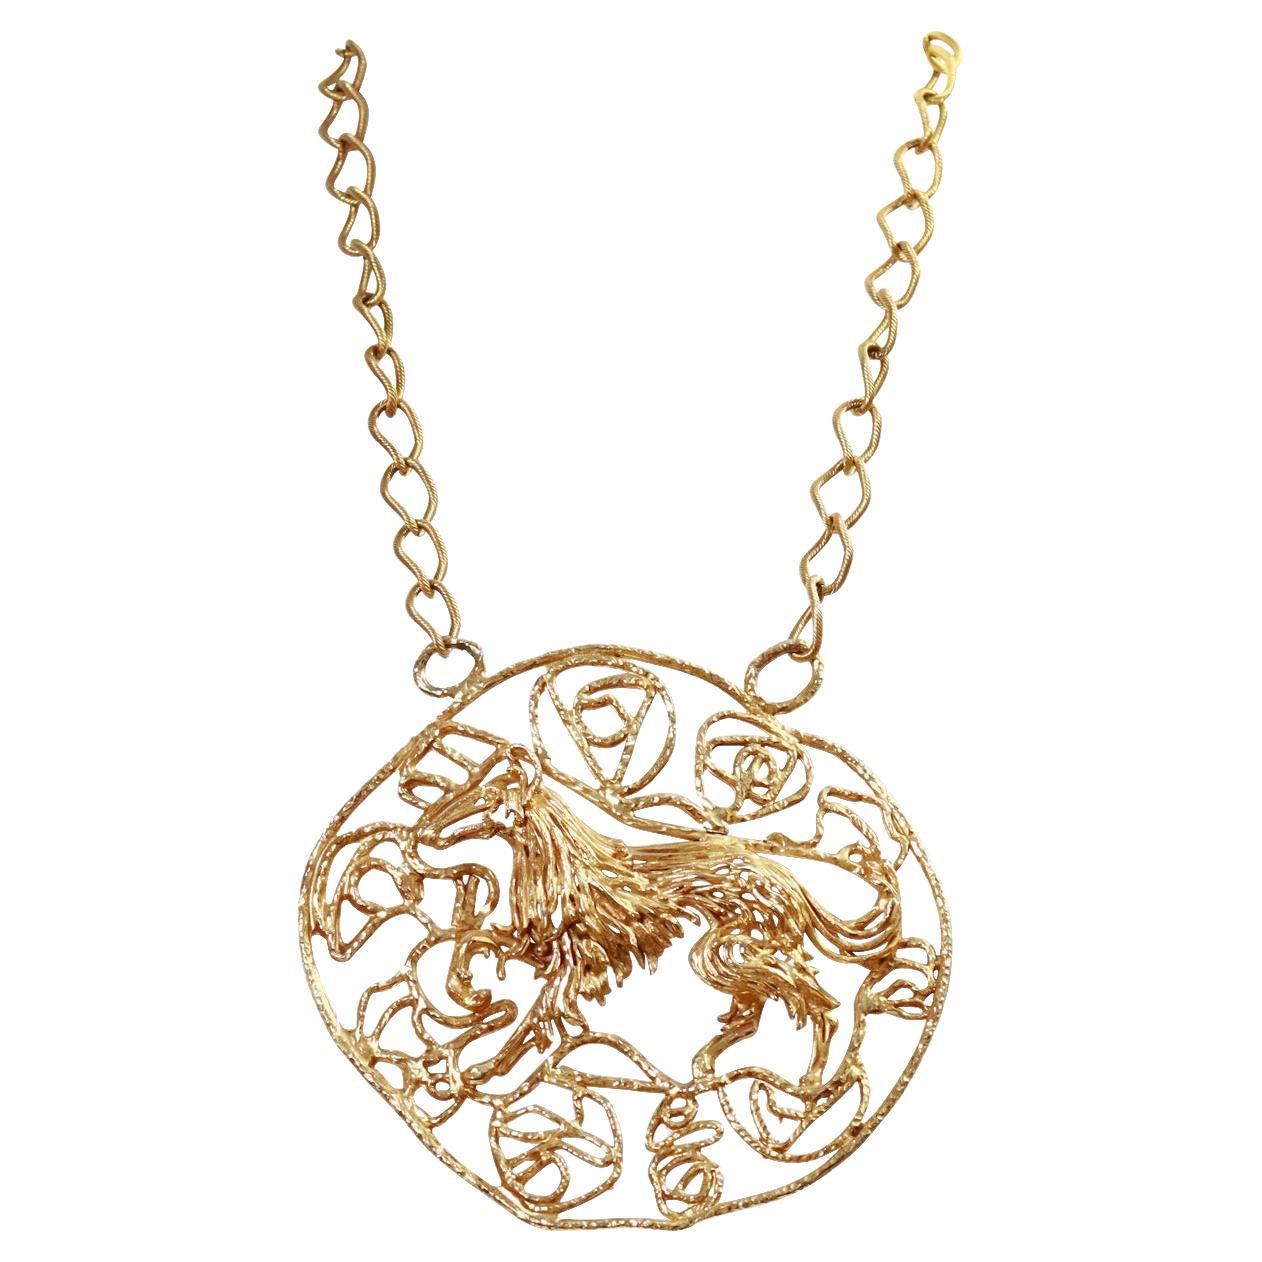 Vintage Gold  Tone Large Round Necklace Circa 1980's.  This is so special and so unusual.  I believe it is a horse in the middle of the circle.  This looks so chic and amazing in the middle of  a white blouse or black turtle neck or even a white